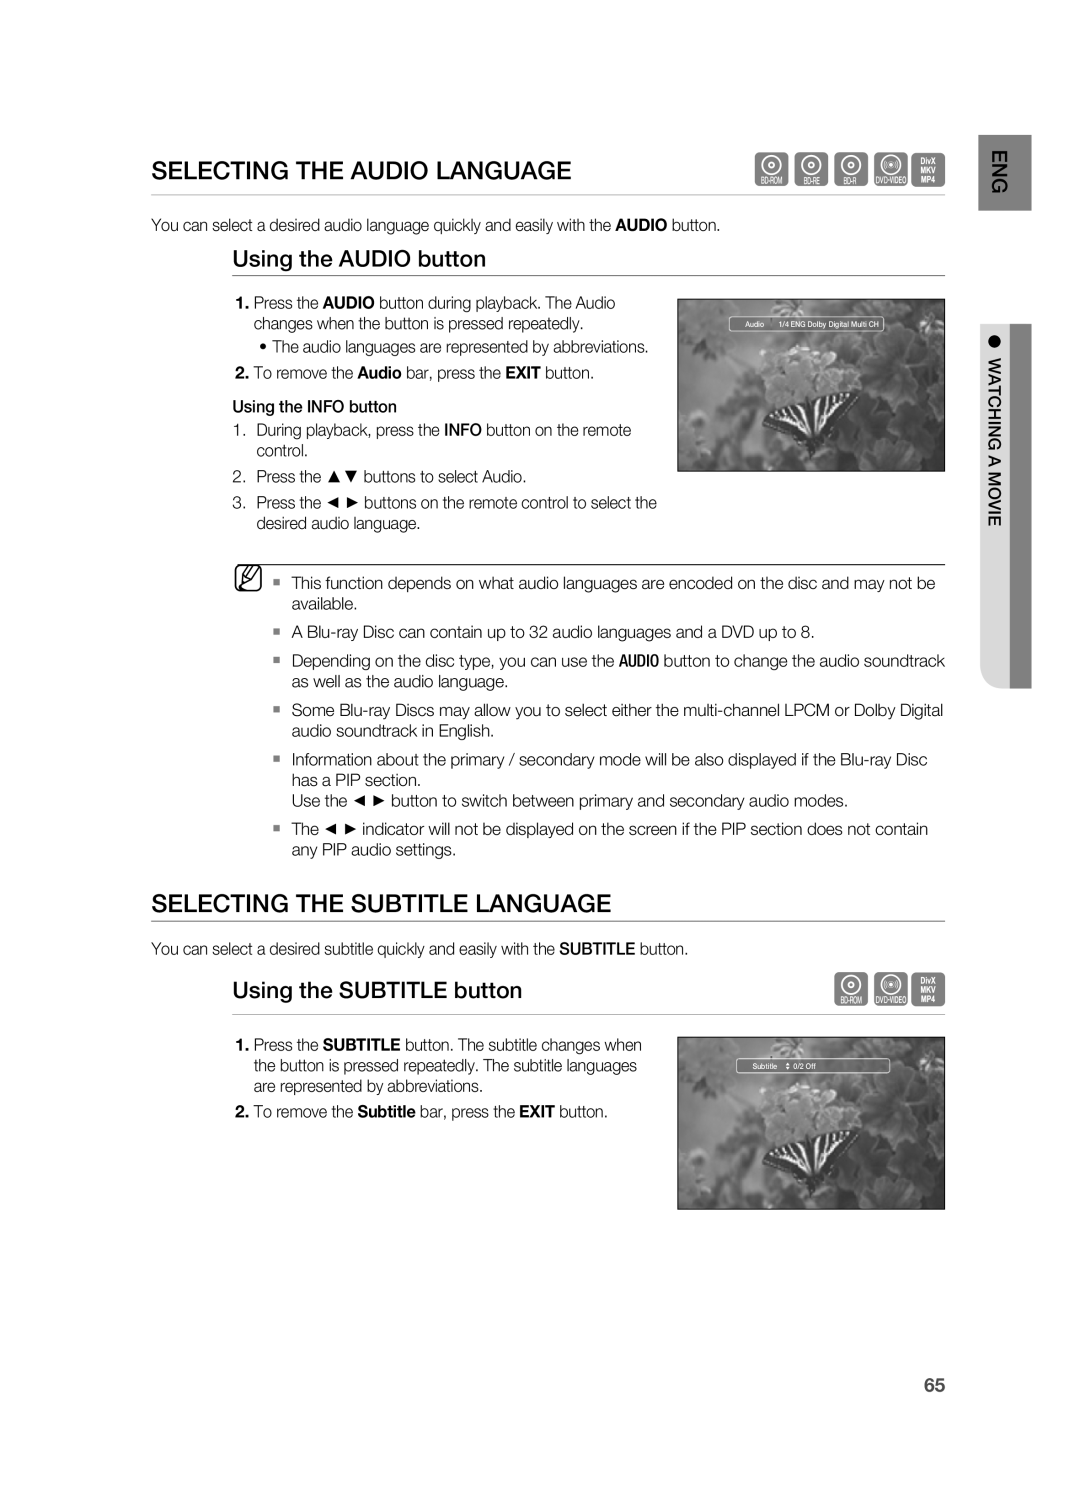 Samsung HT-BD3252A user manual hgfZ, Selecting The Audio Language, Selecting The Subtitle Language, Using the AUDIO button 